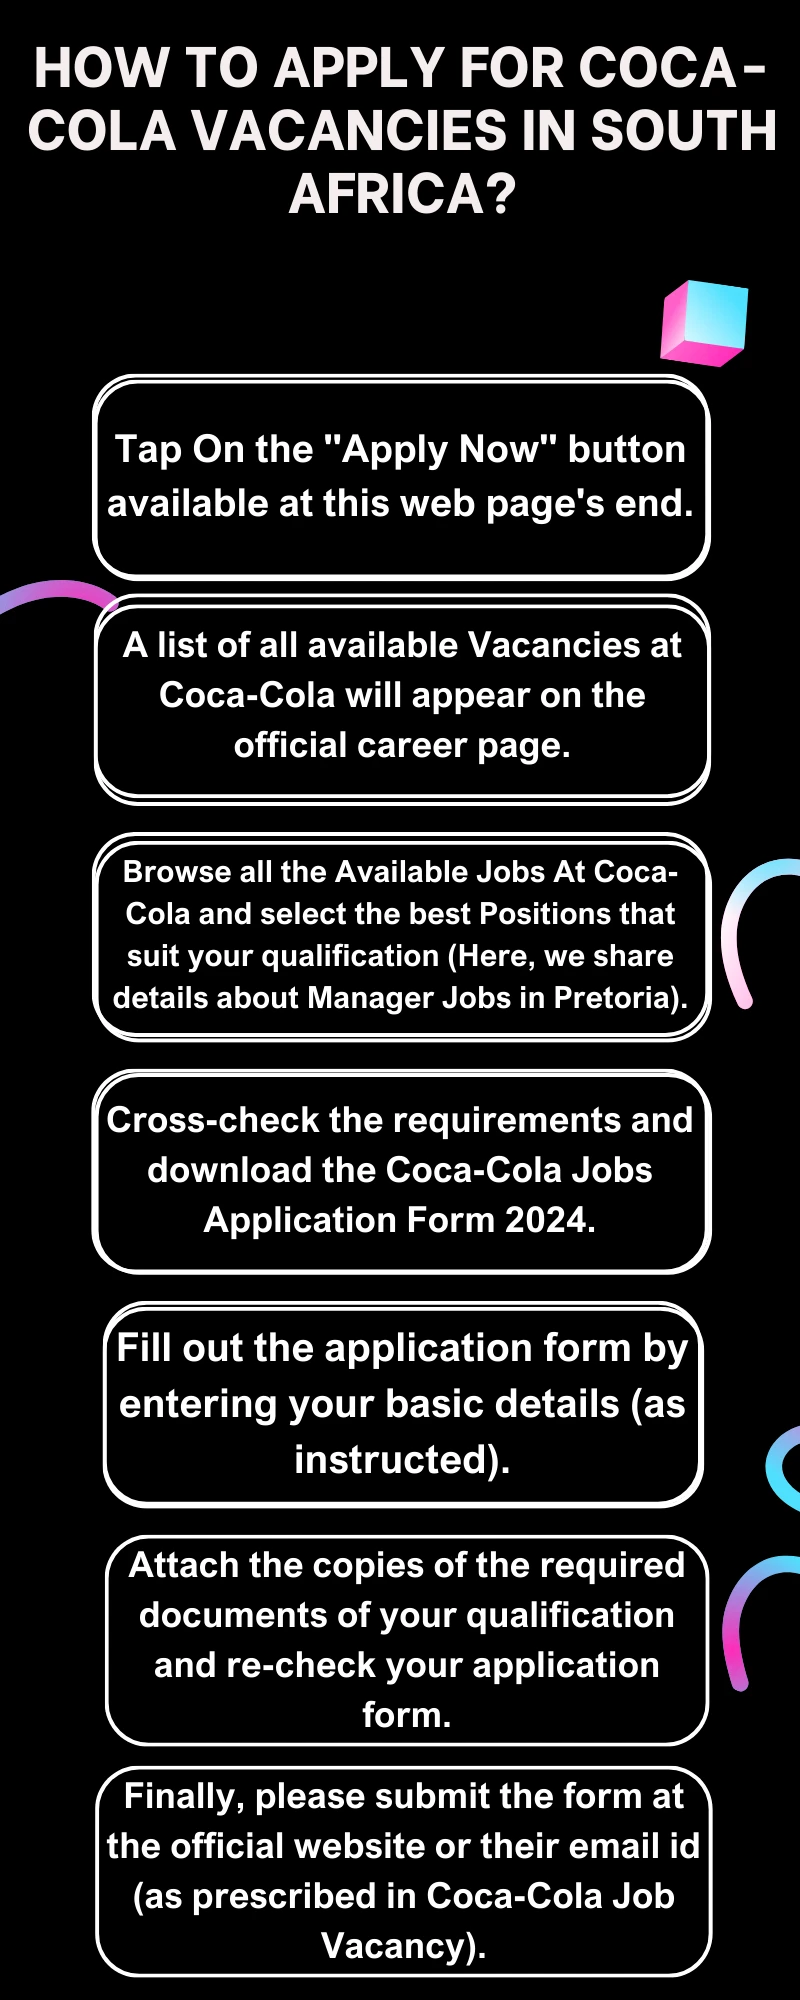 How To Apply For Coca-Cola vacancies in South Africa?